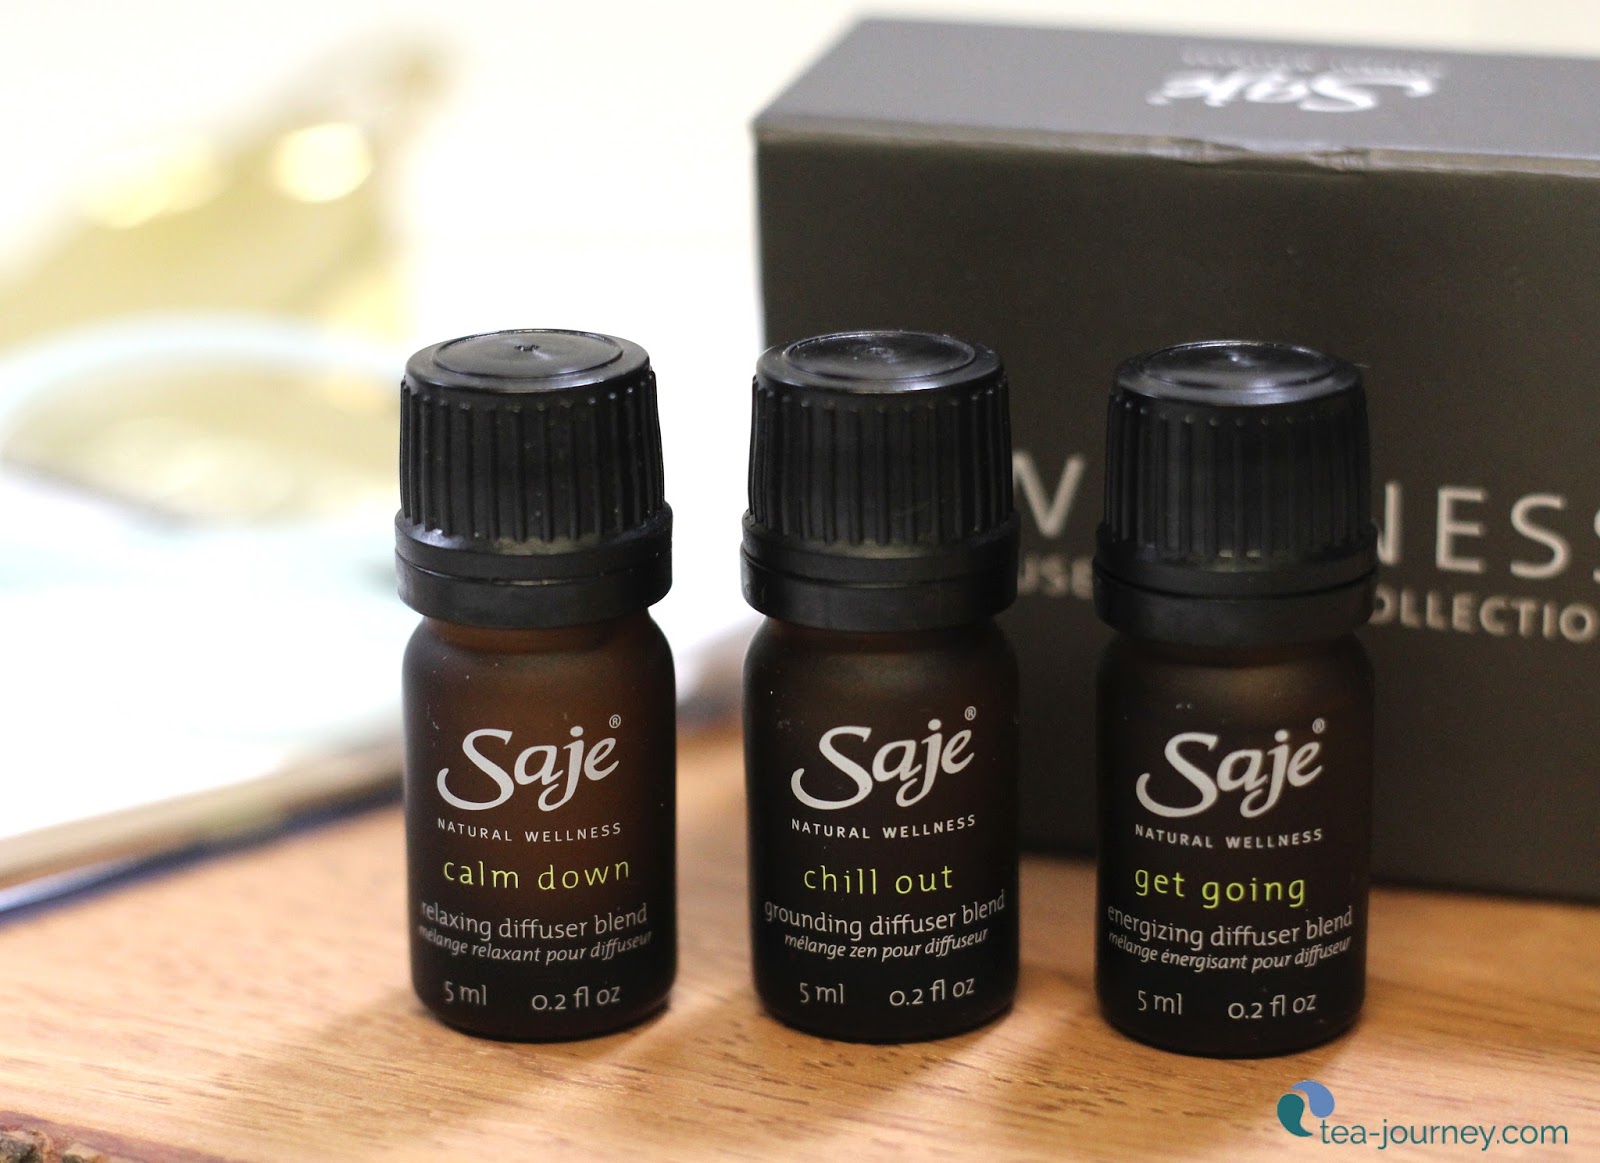 Saje is a Canadian wellness company which has made life much more productive. This selection of their oils is what has helped me not only stay healthy but be more productive in all parts of life.